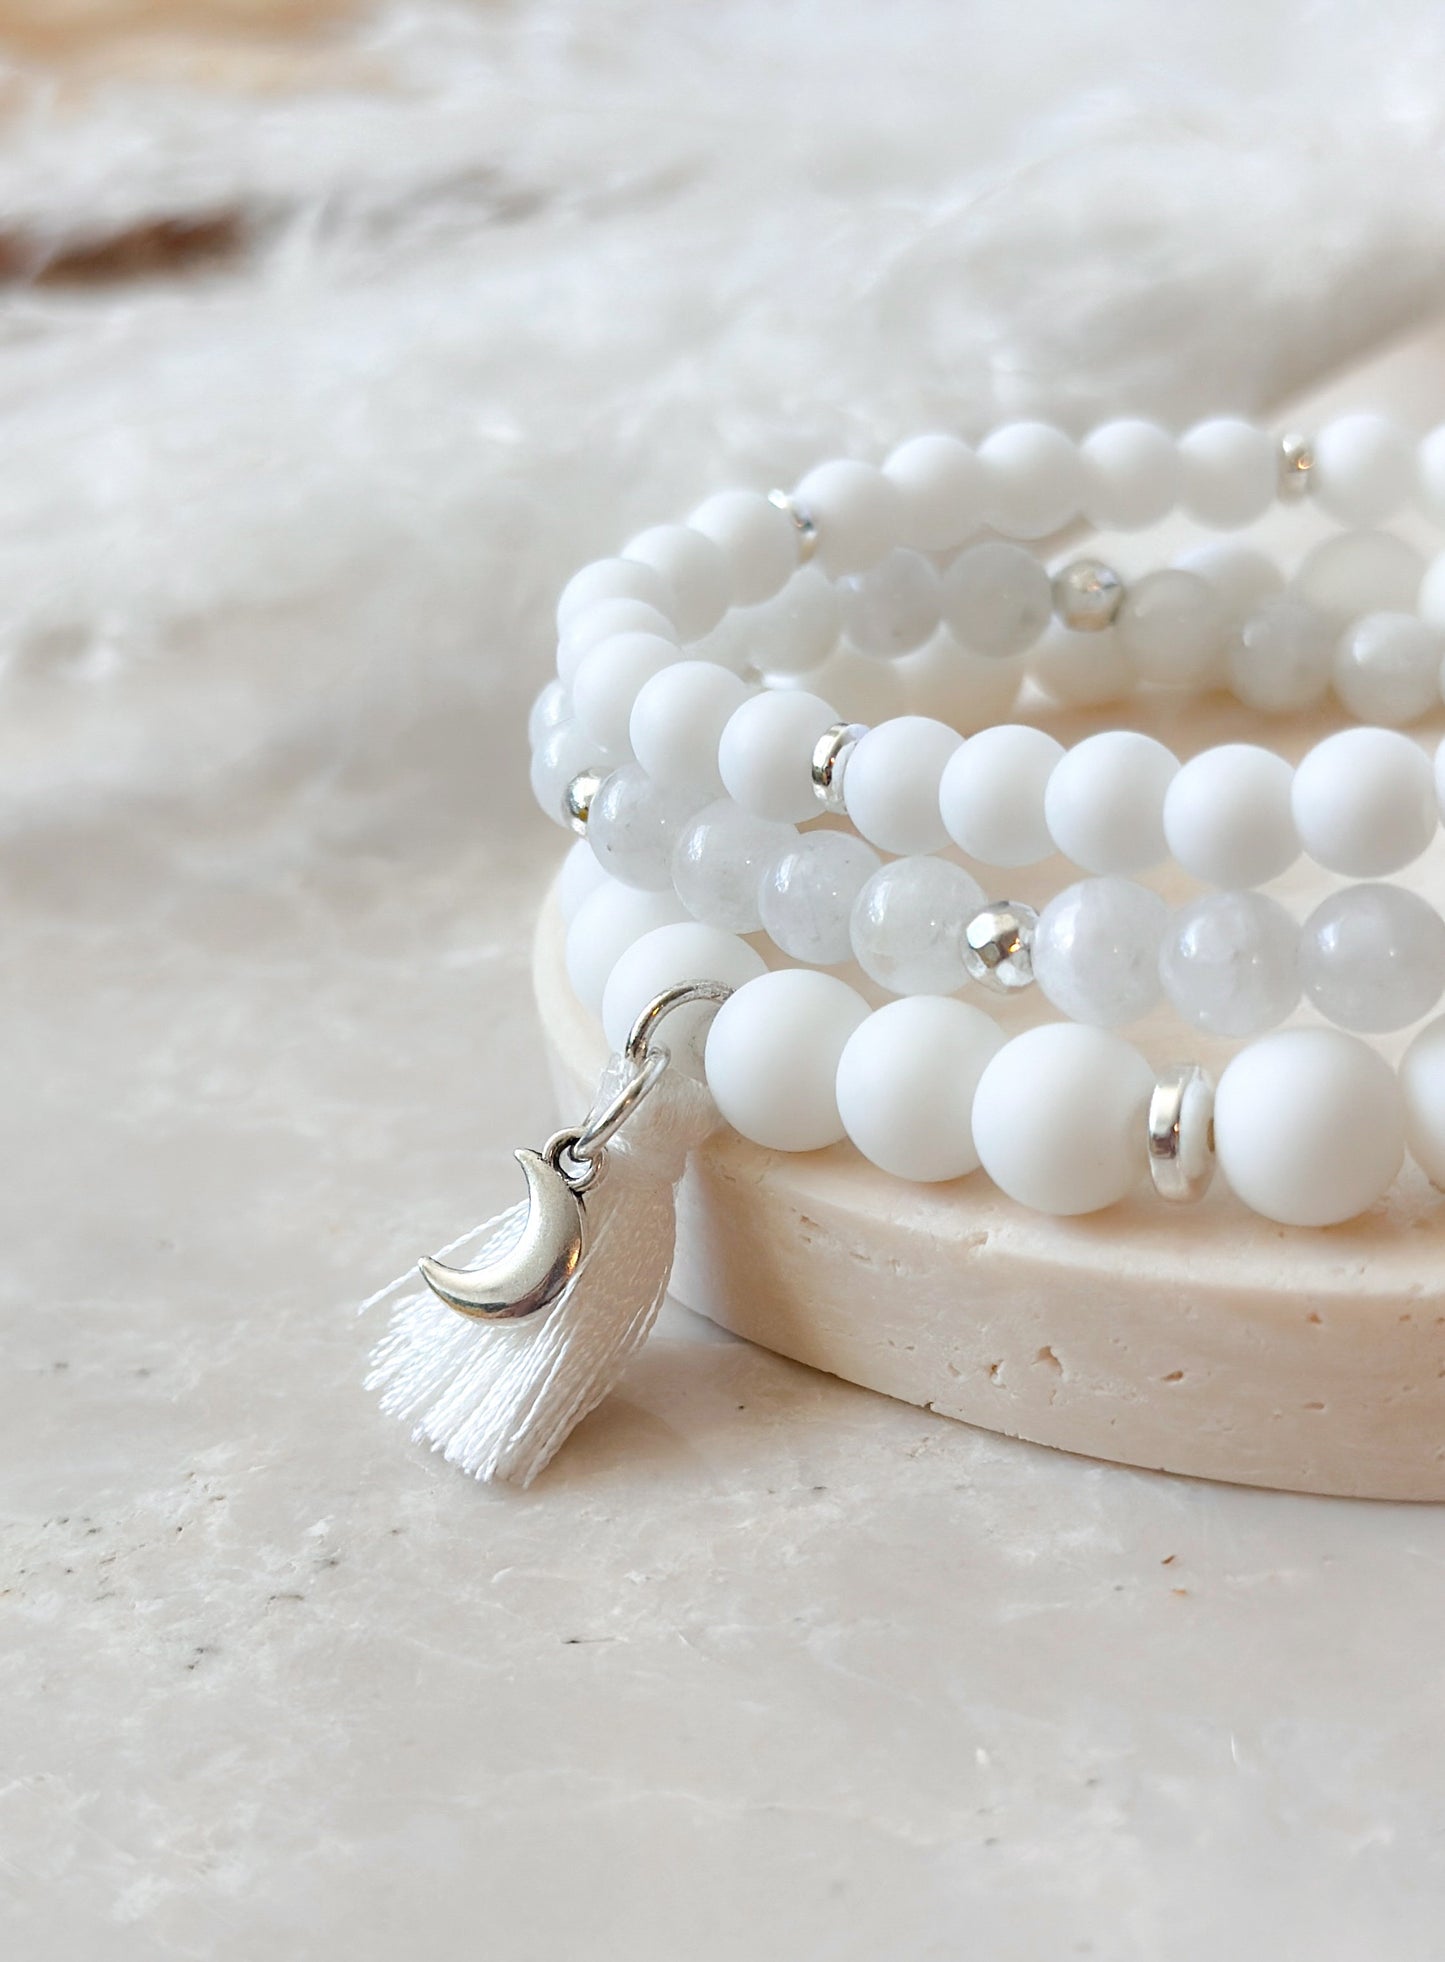 White Agate bracelet set, thoughtfully crafted with White Agate and Moonstone gemstones.